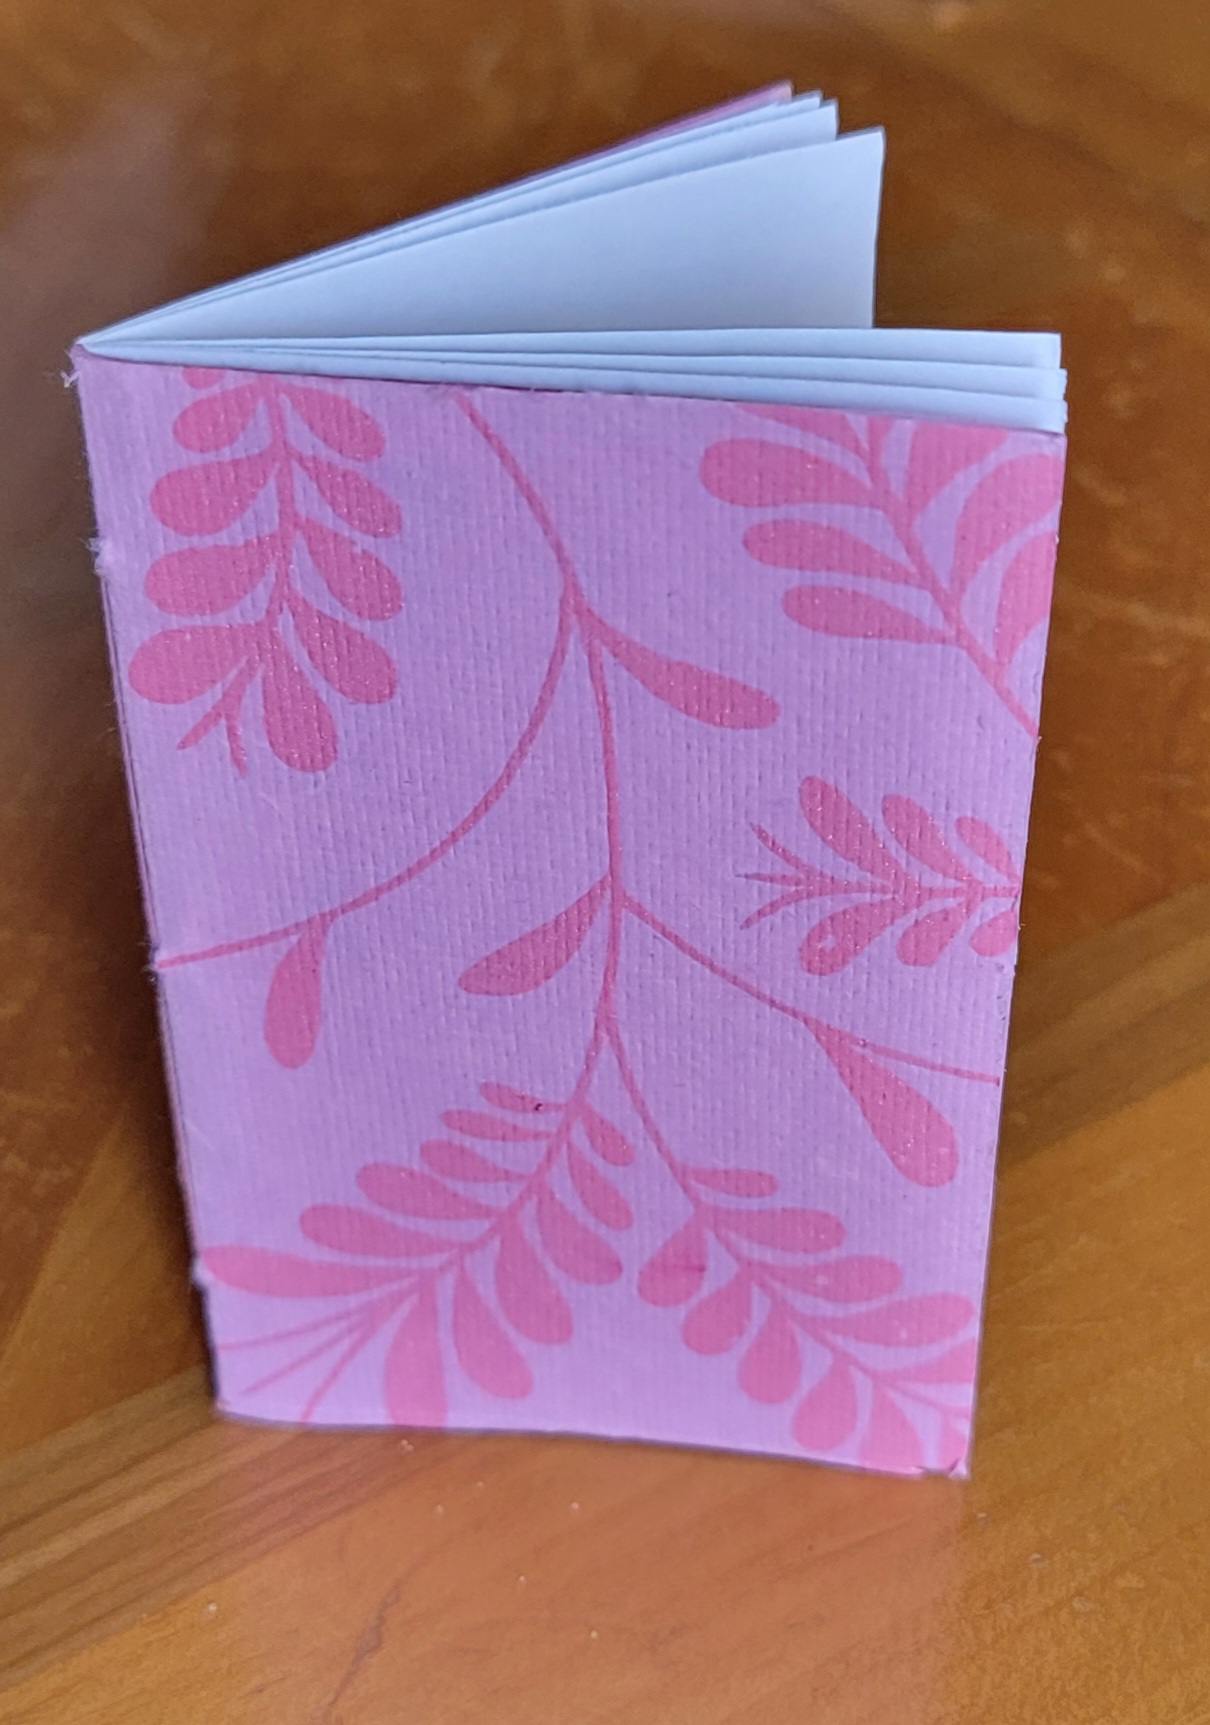 small pink folded pamphlet-style booklet